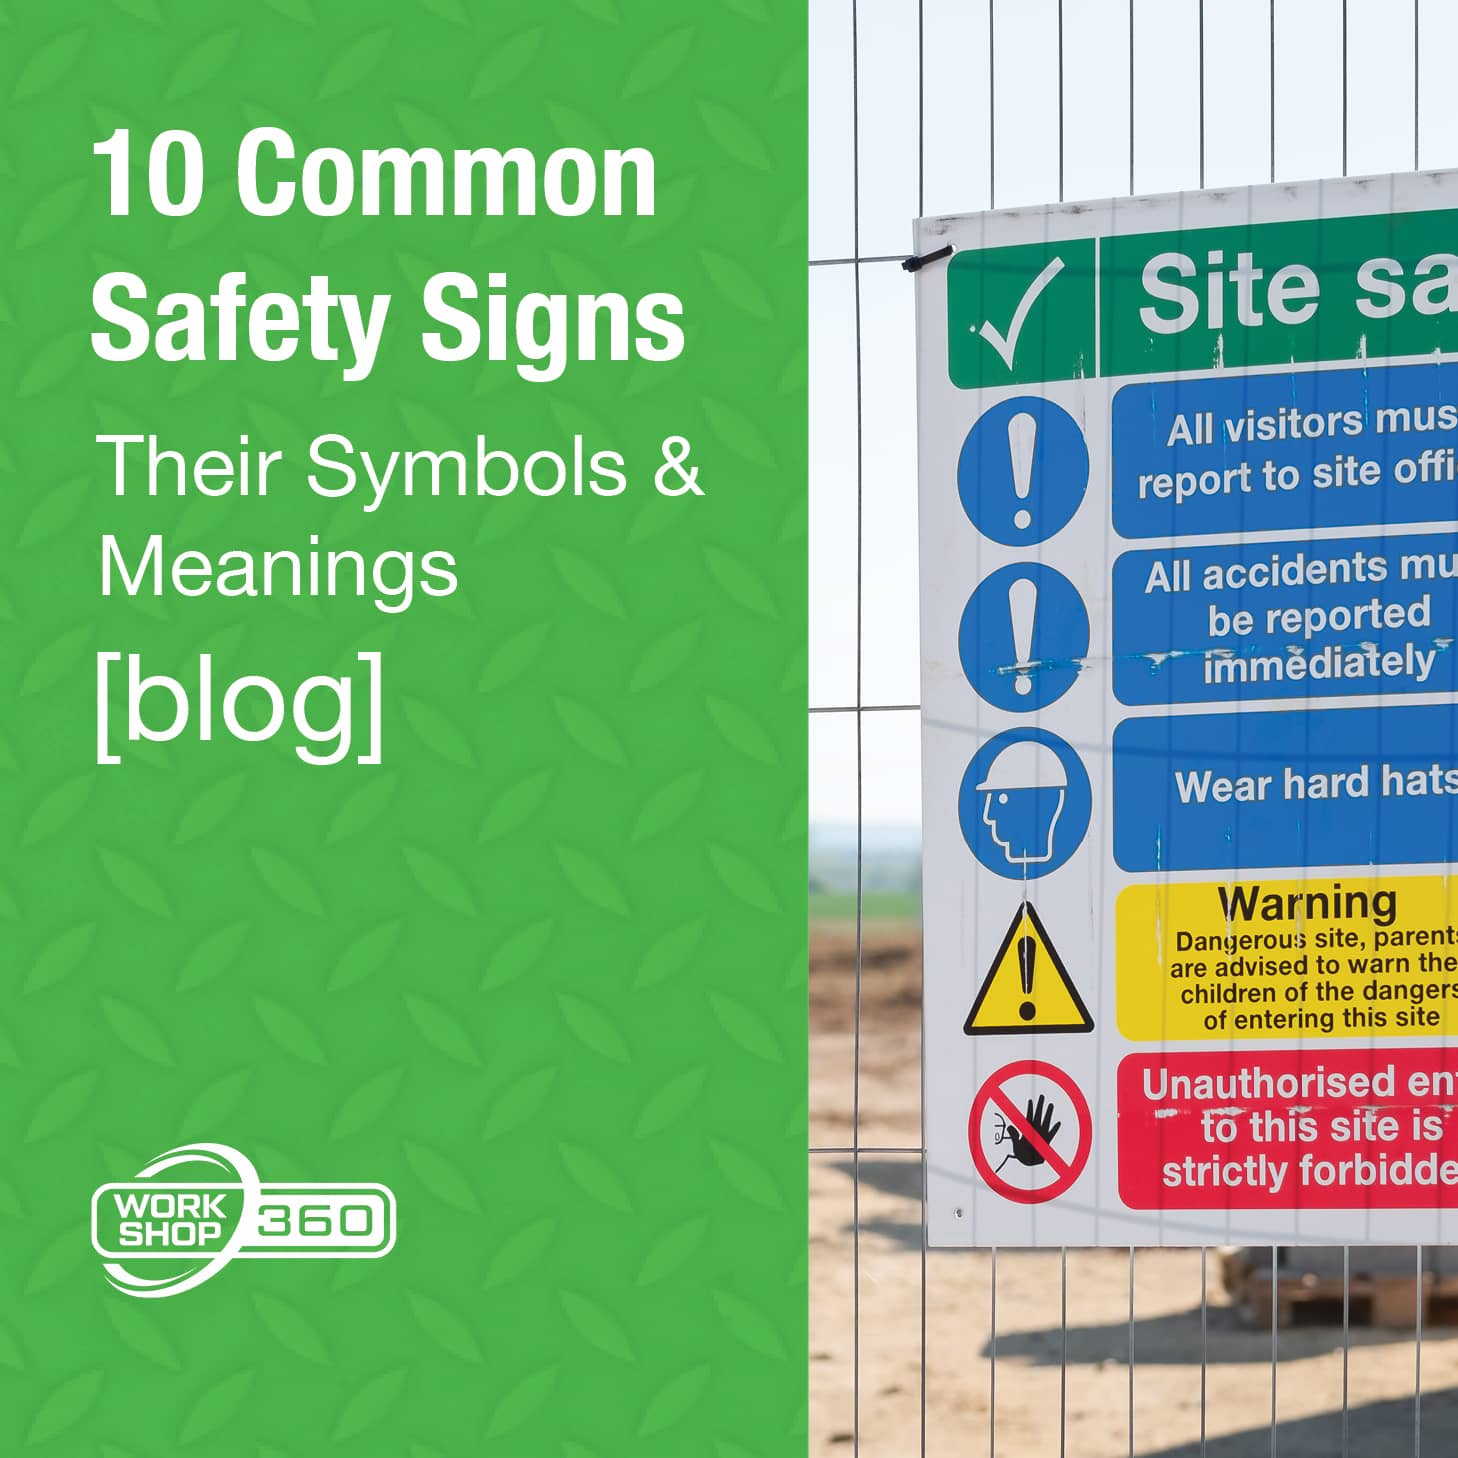 10 Common Safety Signs - Their Symbols & Meanings